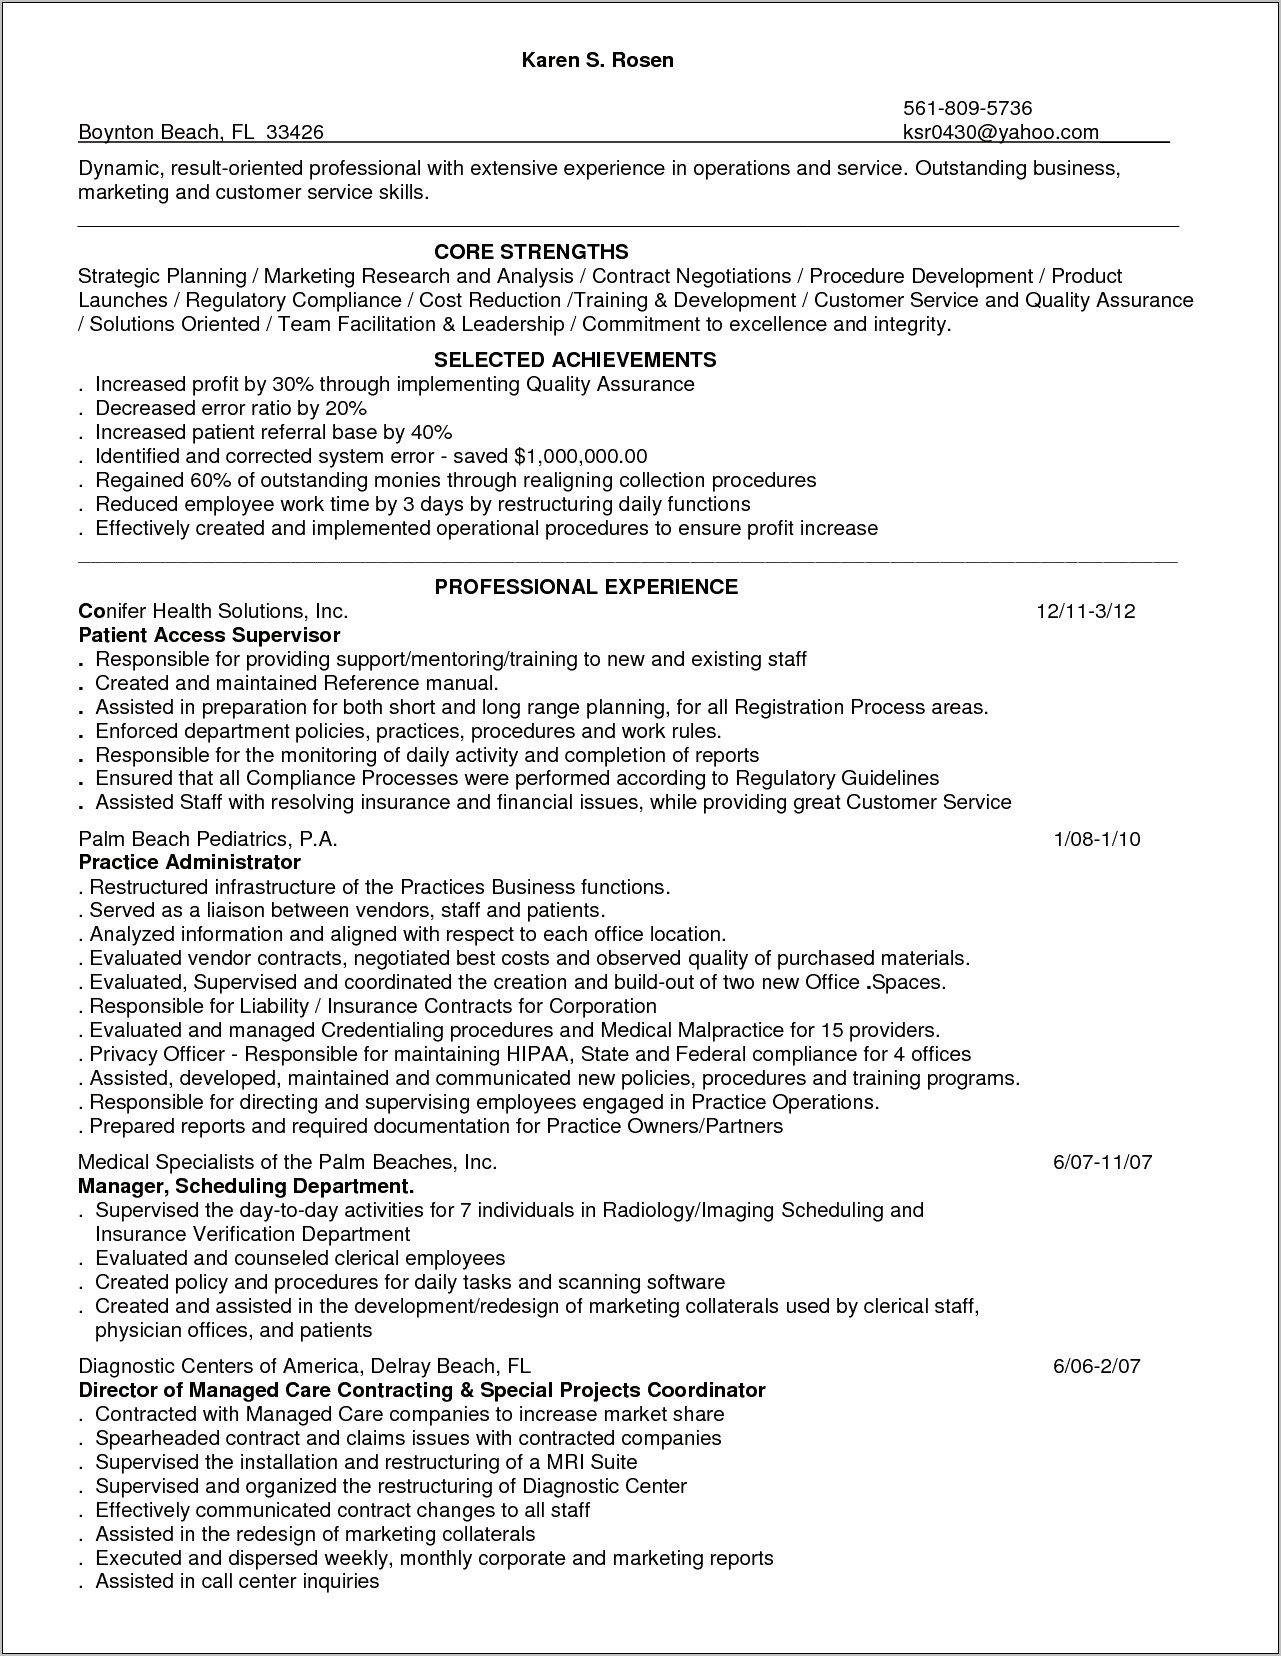 Resume Objective For Health Care Coordinator